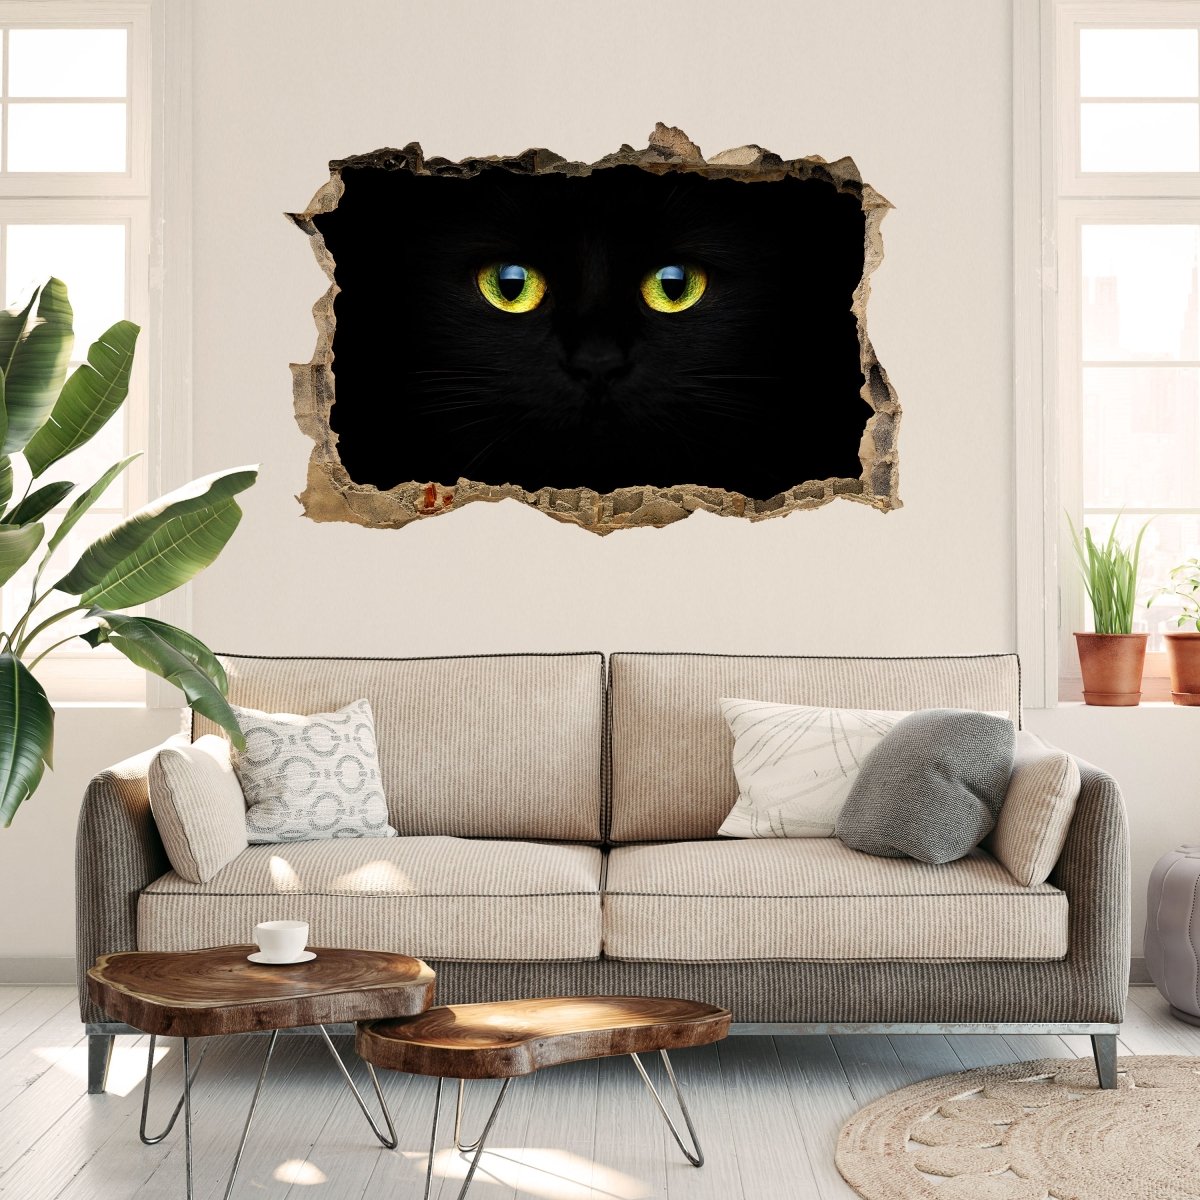 3D wall sticker mysterious cat eyes - Wall Decal M1015